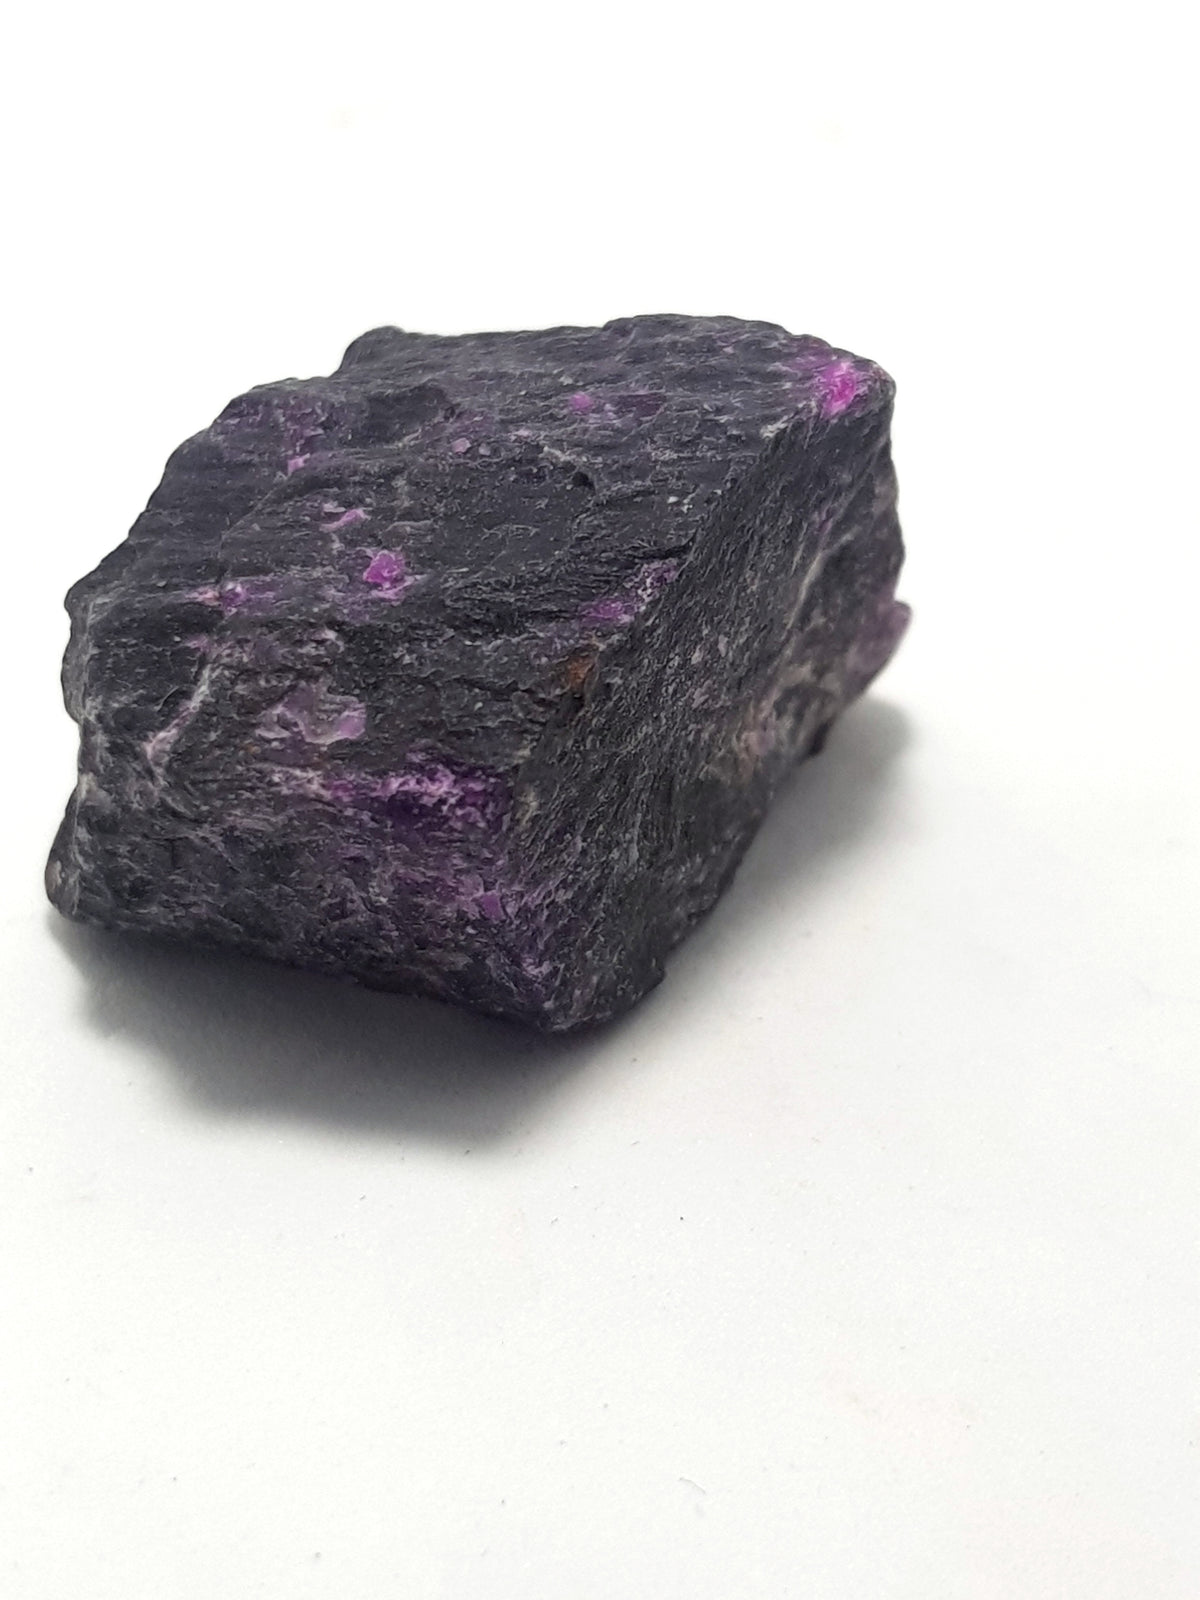 raw sugilite. This rough sample contains flecks and clusters of light purple sugilite in a black matrix